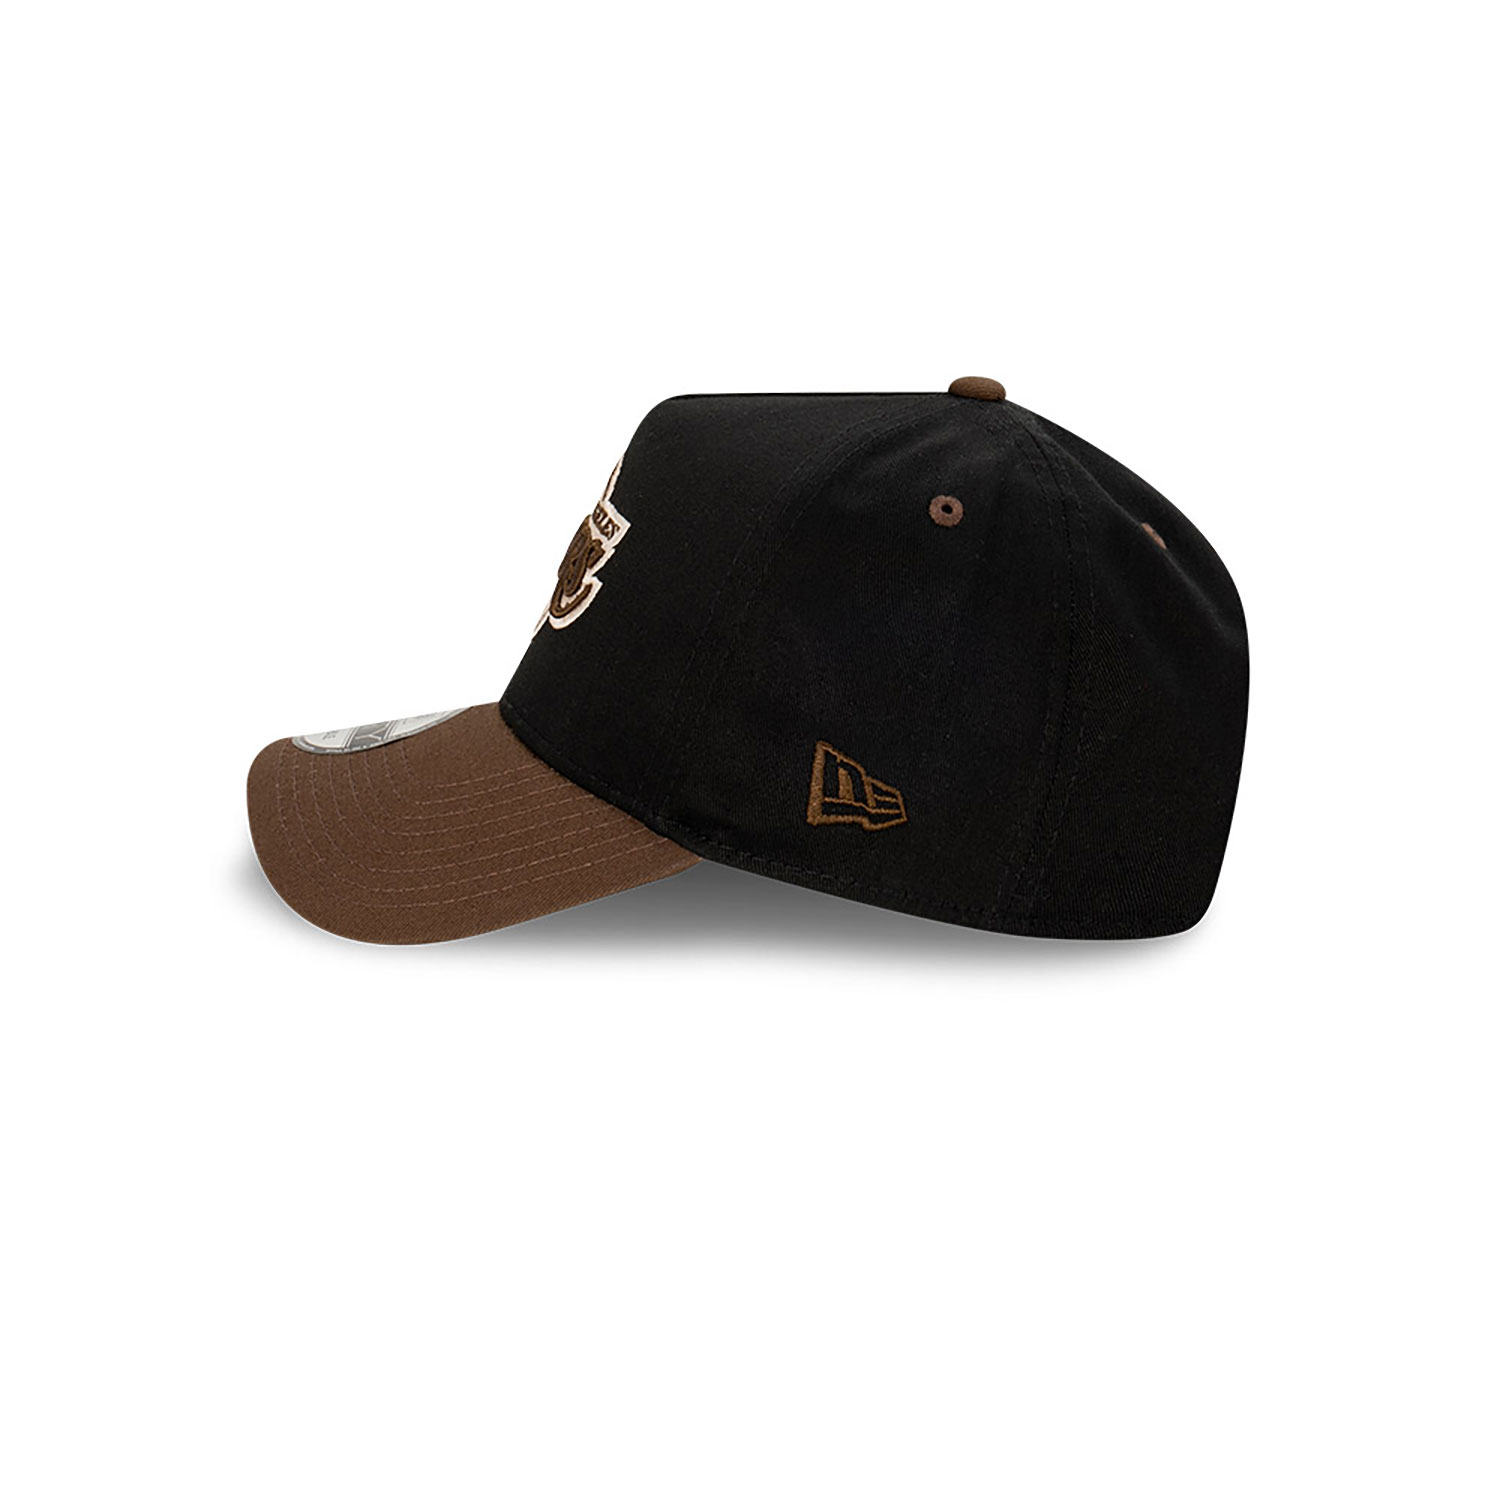 LA Lakers Grizzly Black 9FORTY A-Frame Adjustable Cap